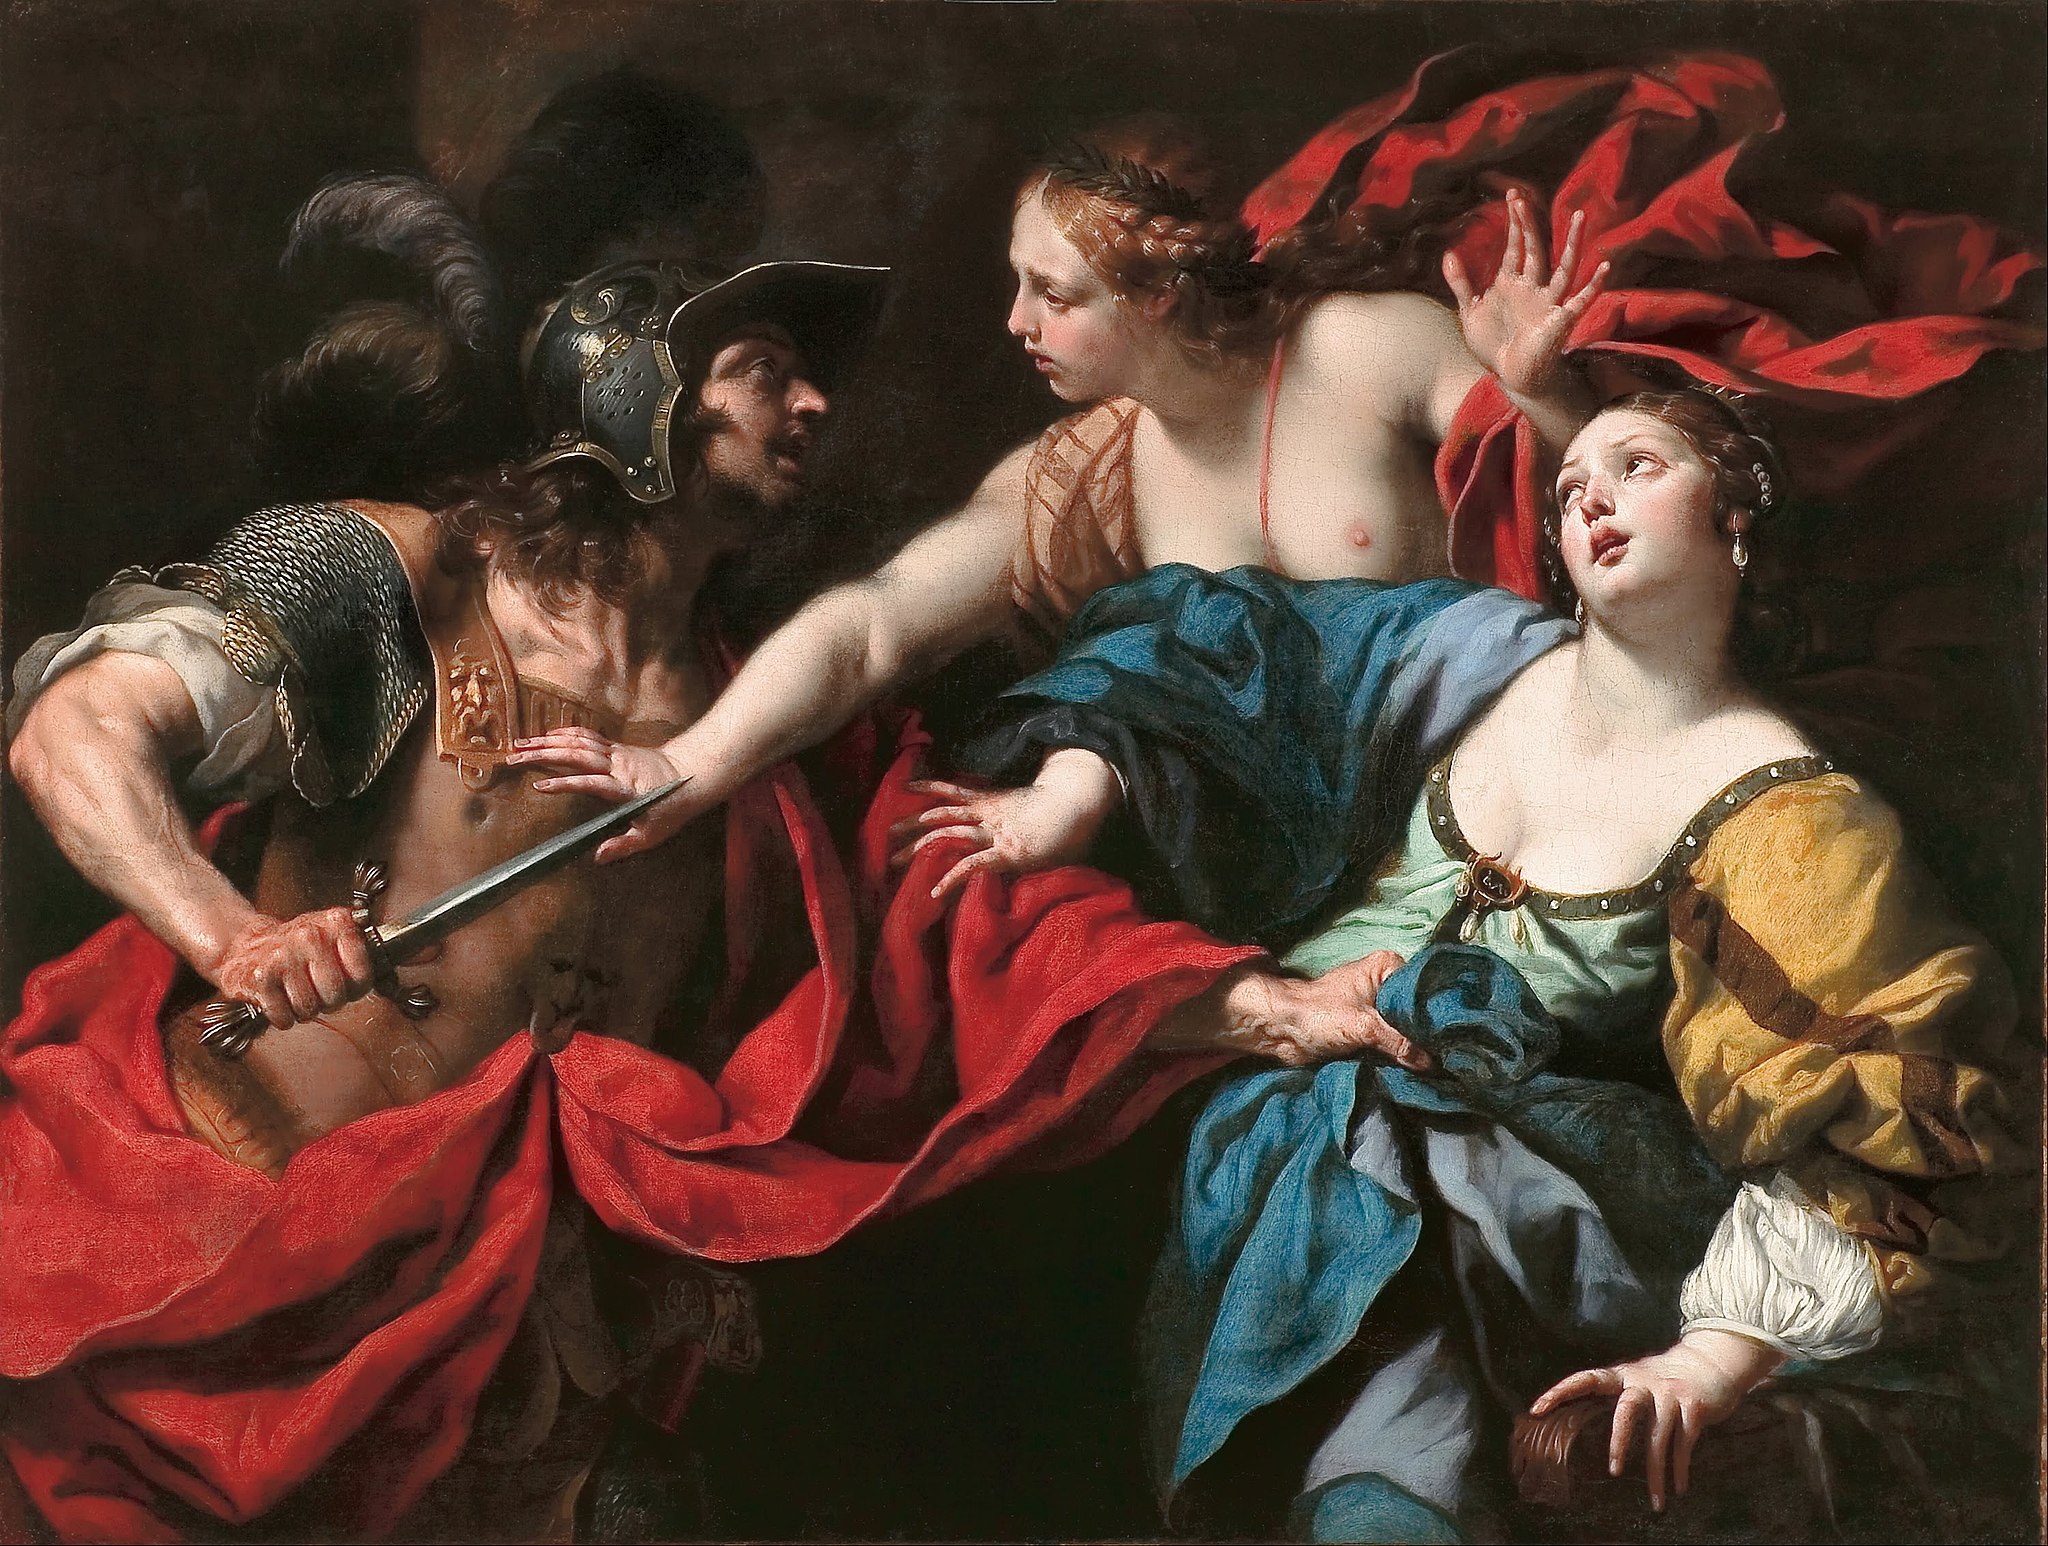 A painting of a dramatic scene. There are two women (pictured on the right). One of them has their arm outreached in defence of the other woman. There is a man (pictured on the left) thrusting a sword toward the women.